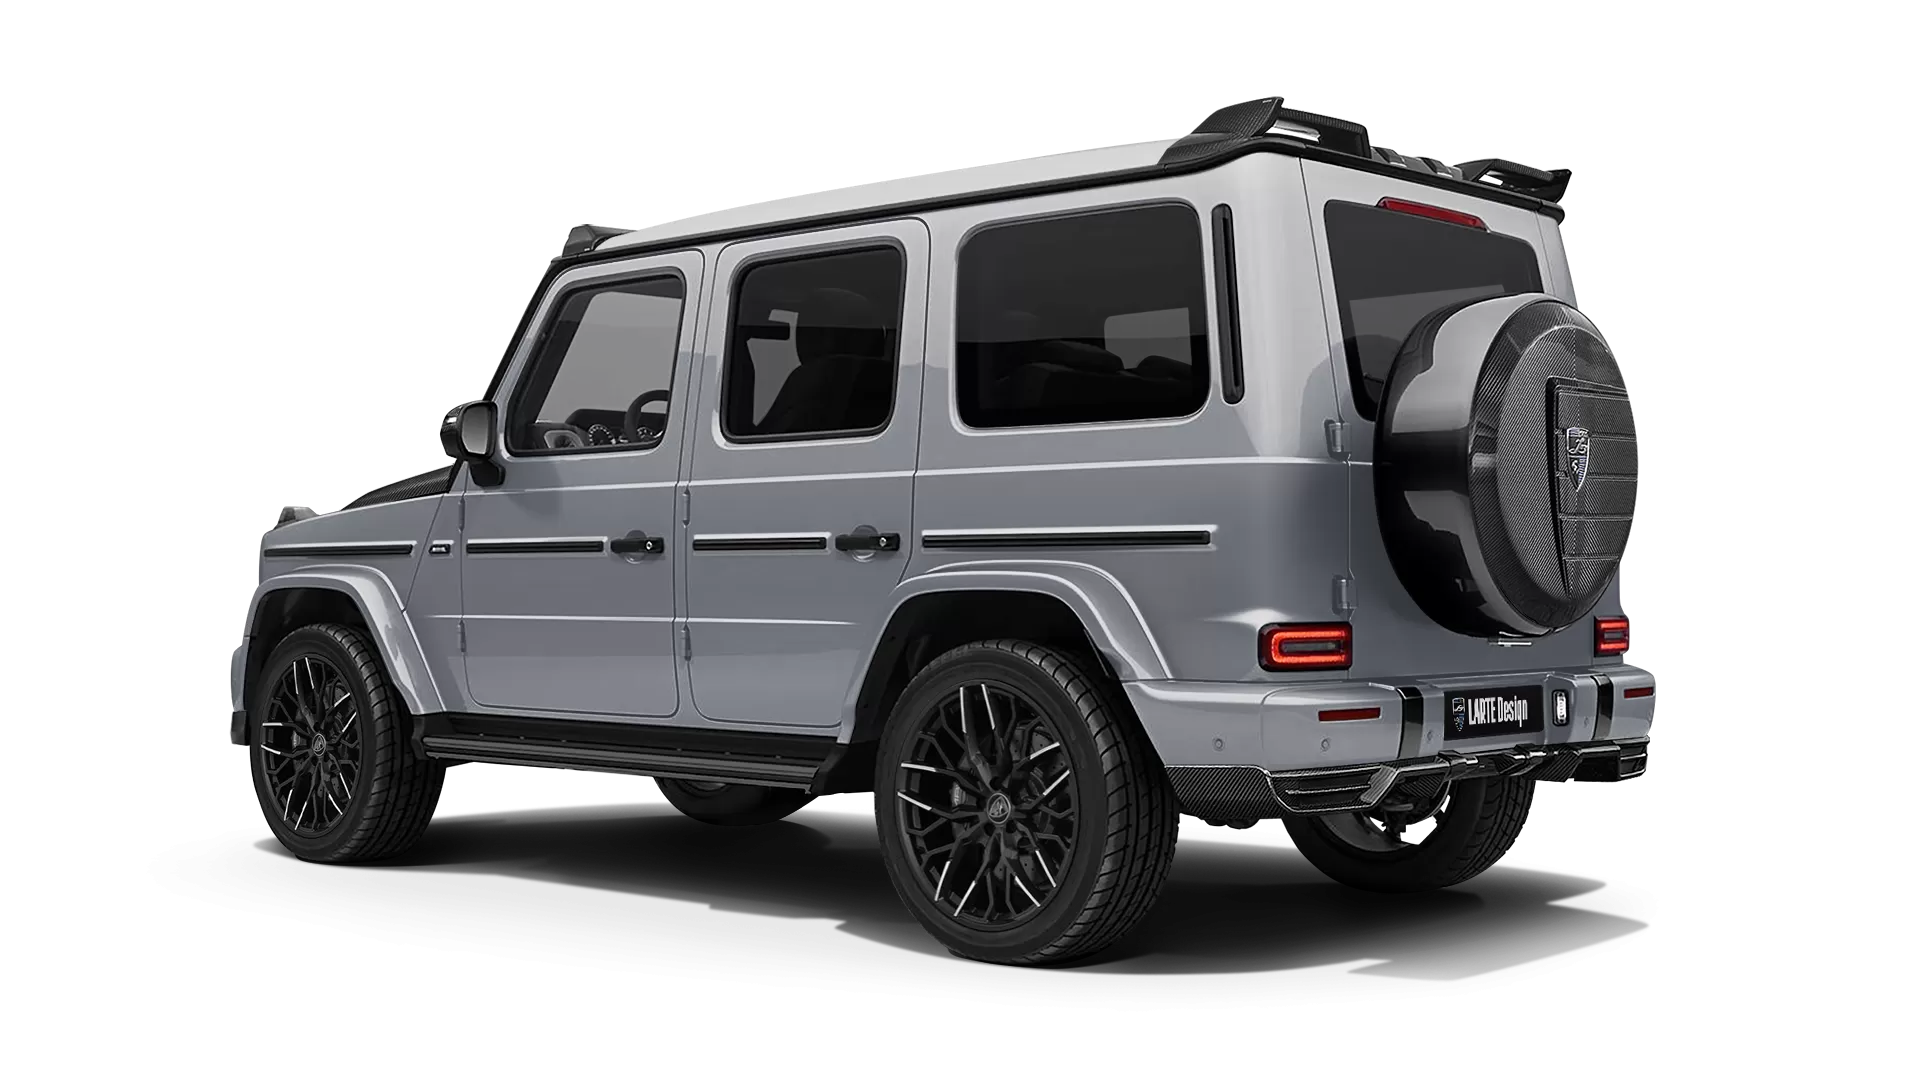 Mercedes G class W463 with carbon body kit: back view shown in Iridium Silver